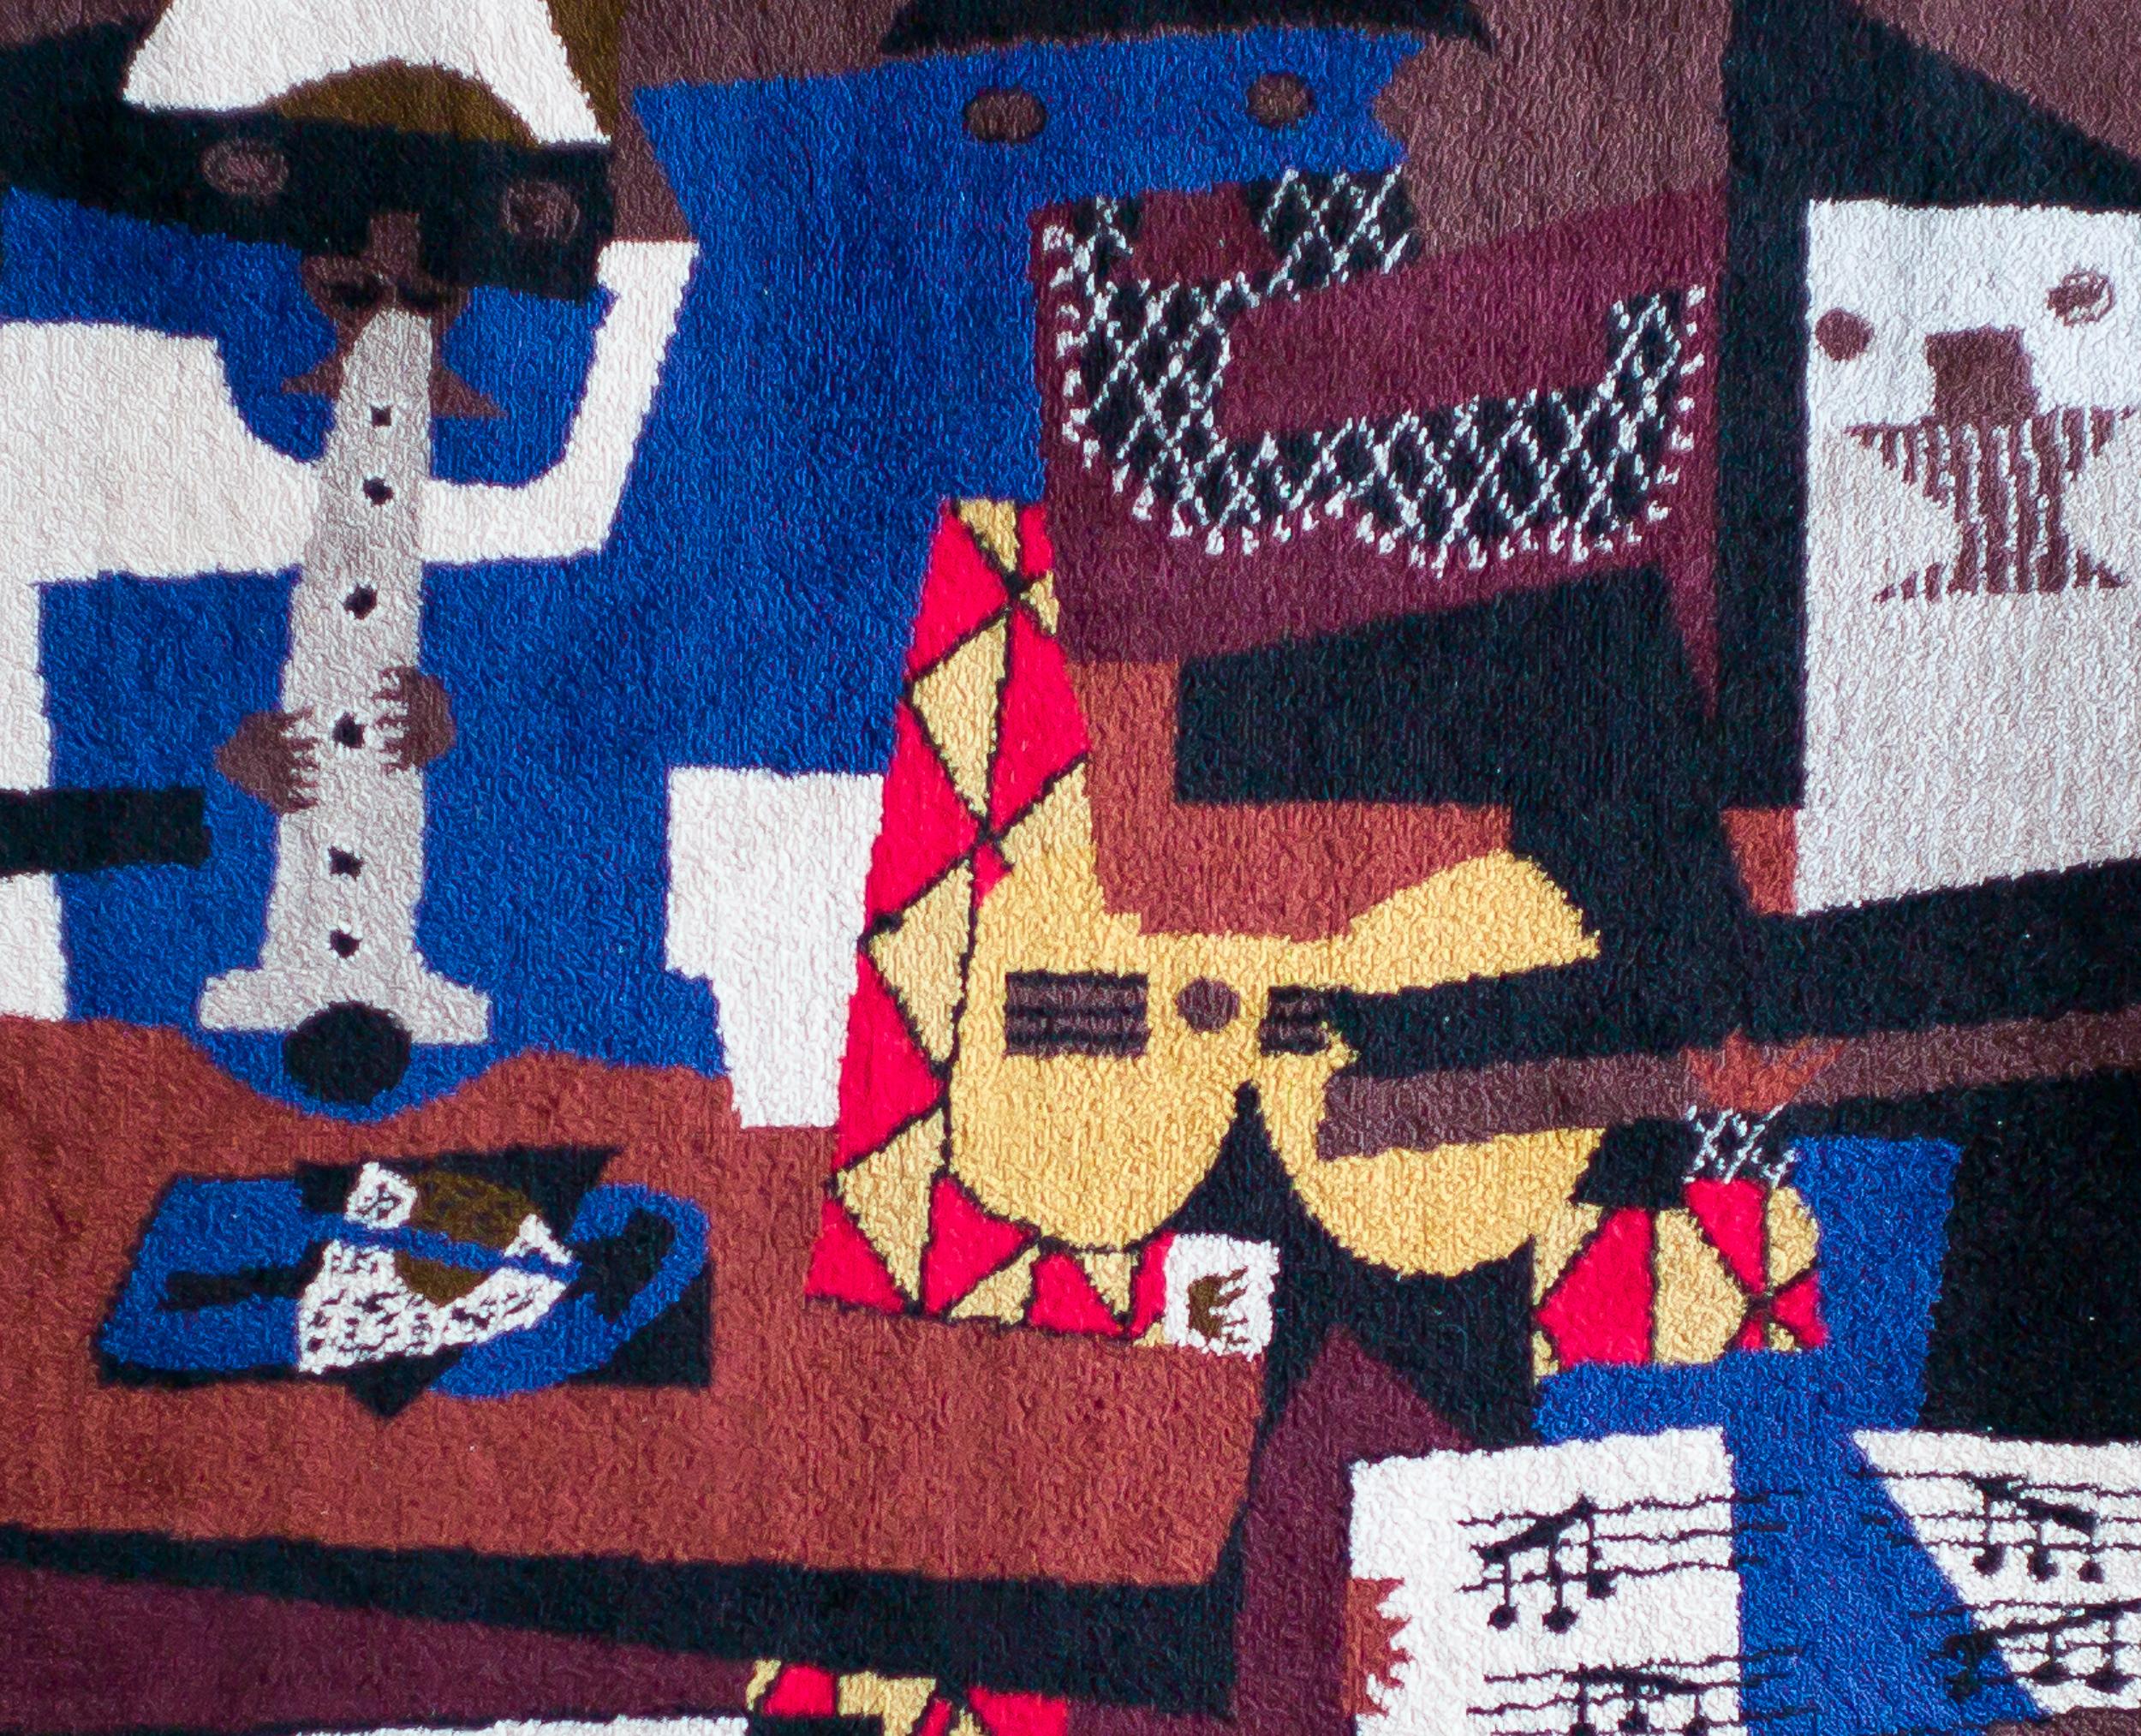 A fine wool carpet by Picasso, woven into short pile tapestry.
After the painting in the Museum of Modern Art, New York. From the limited edition of 500, manufactured and published by Desso, Netherlands, under the license of Succession Picasso,